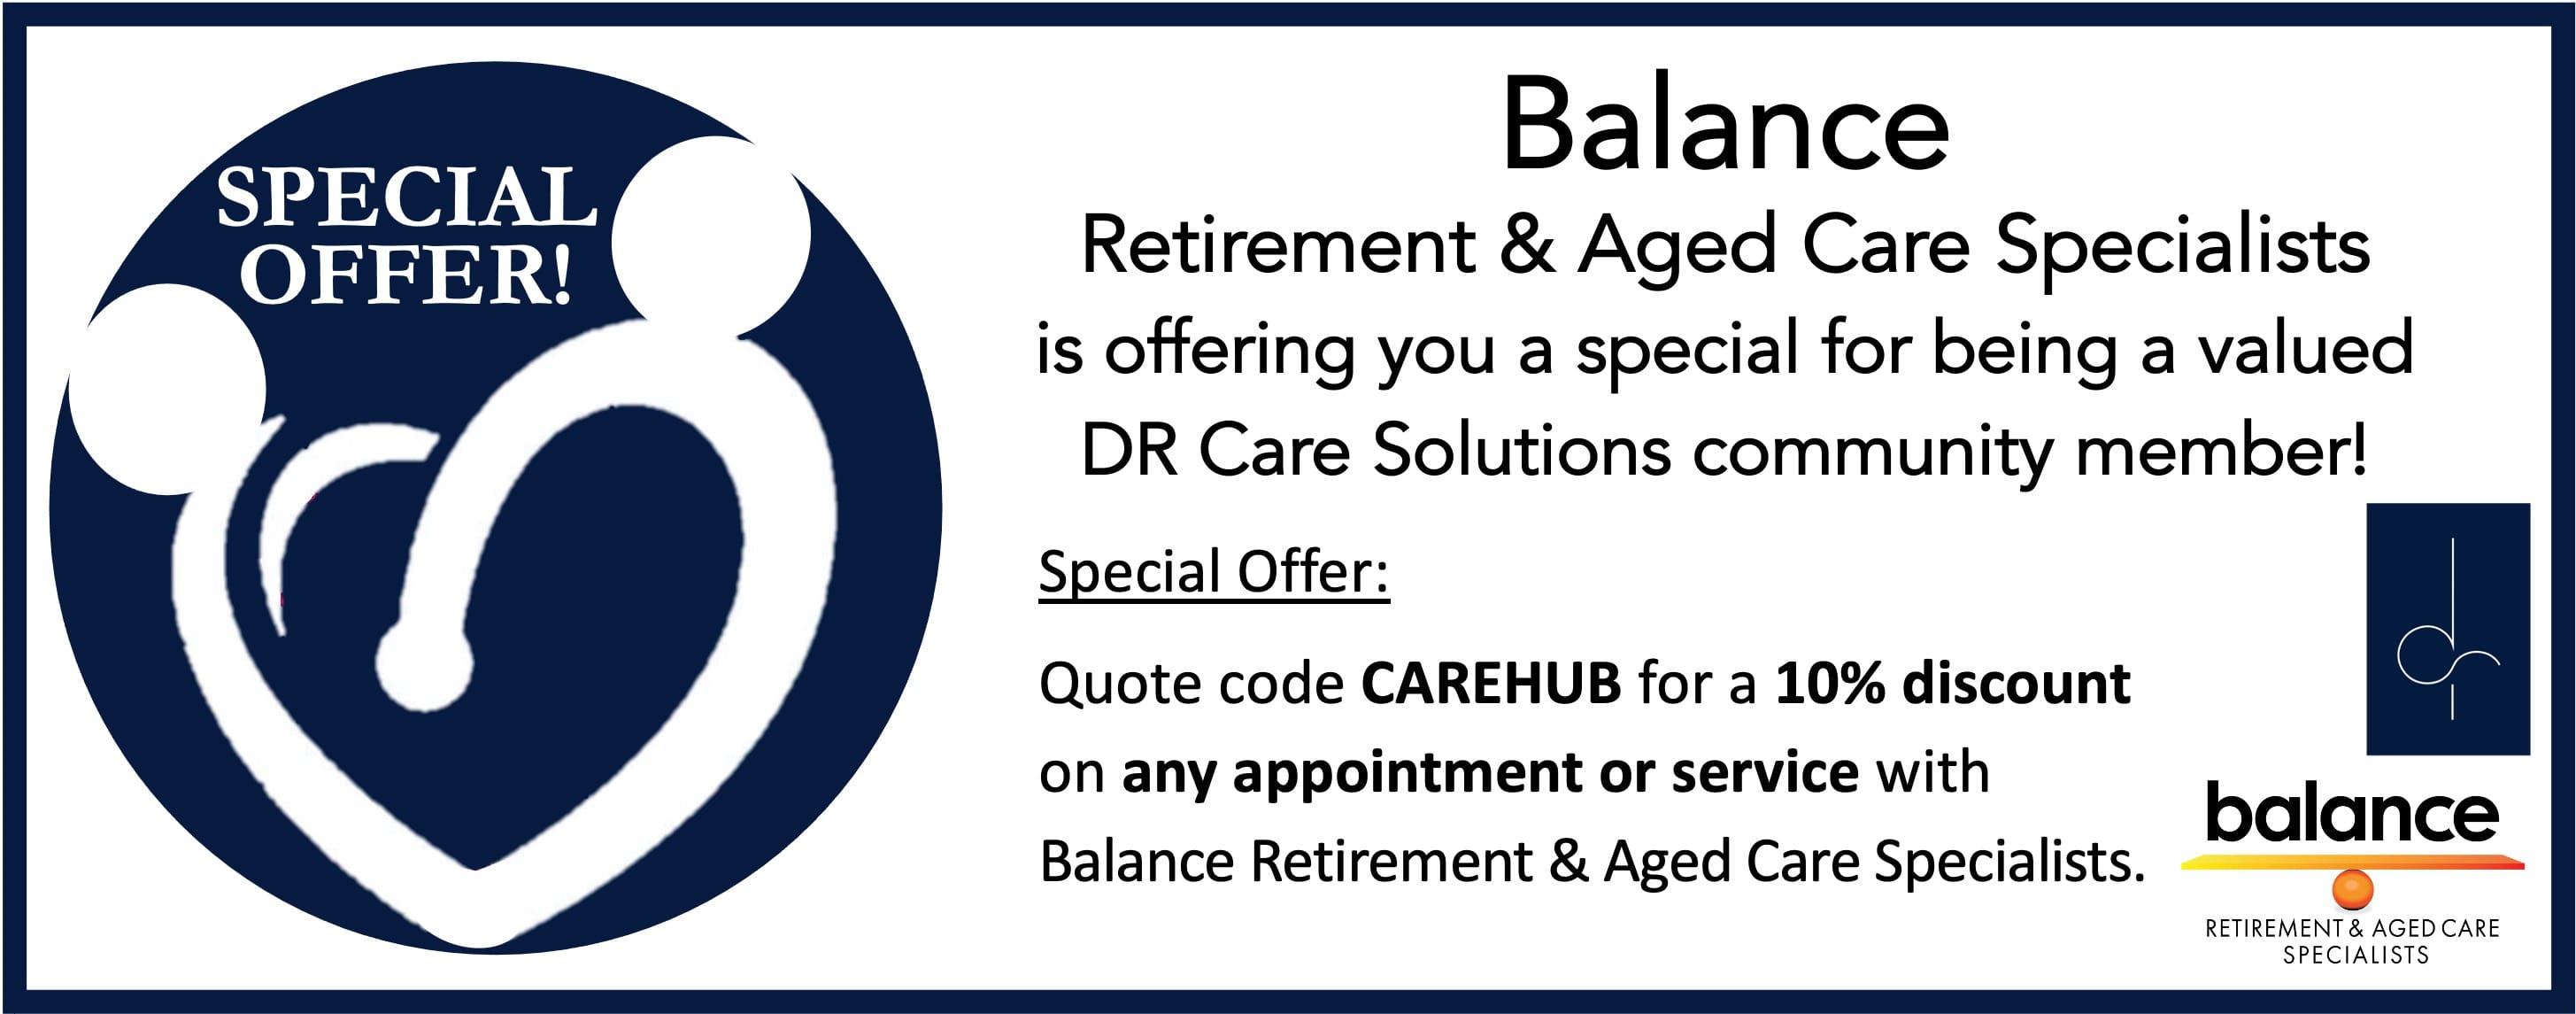 Balance Retirement & Aged Care Specialists - Special Offer